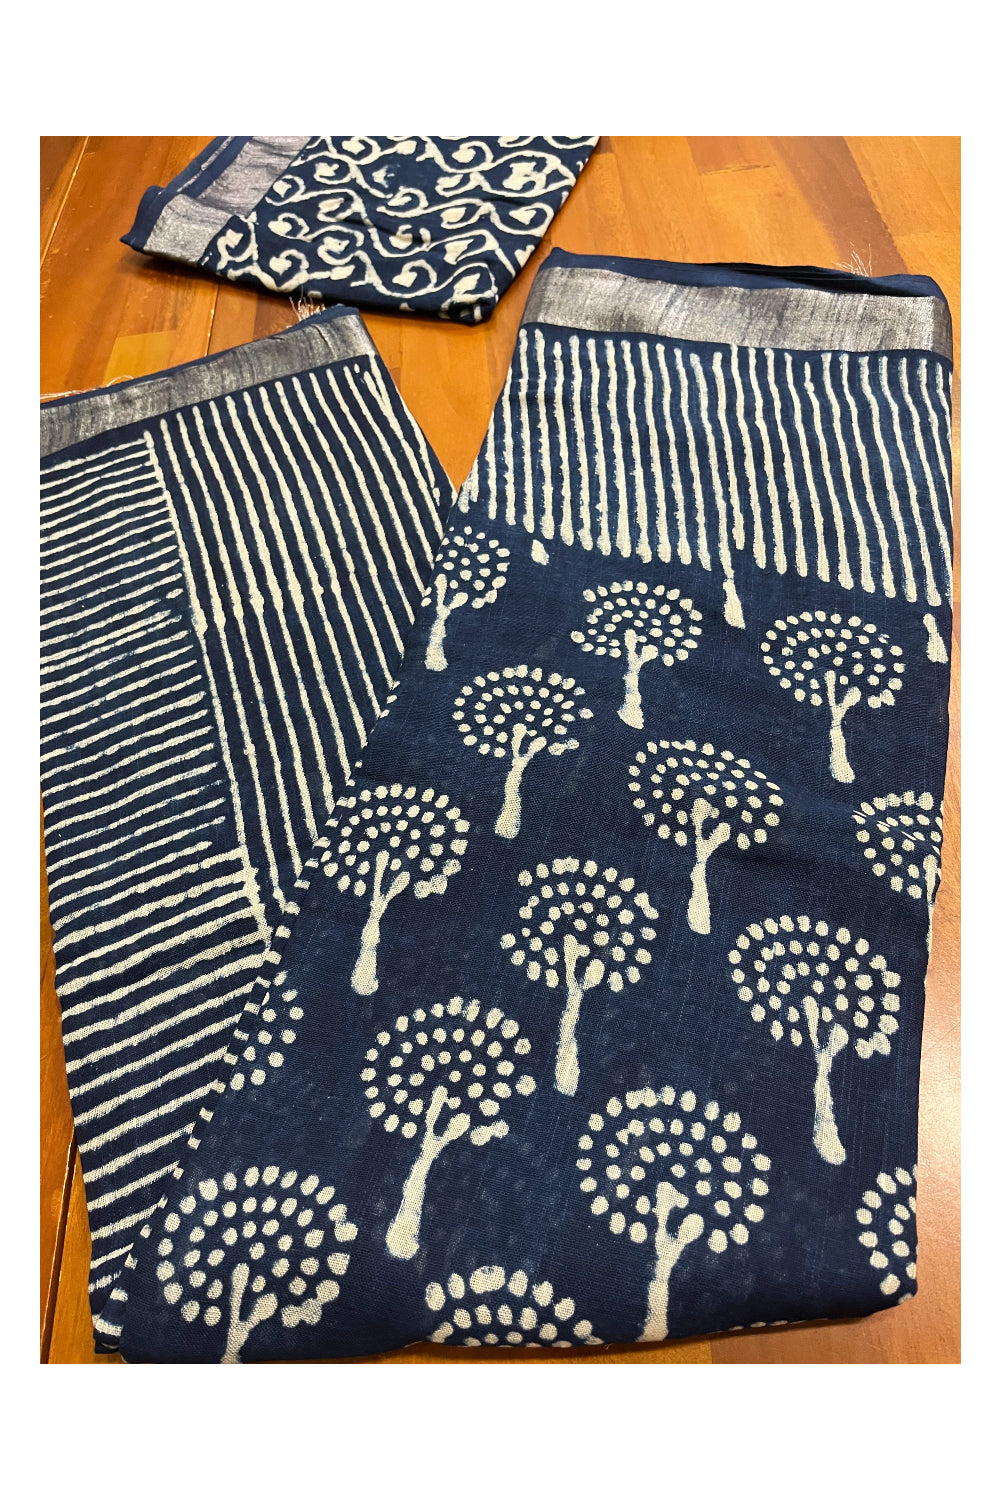 Southloom Linen Dark Blue Designer Saree with Floral Prints (include Separate Blouse Piece)